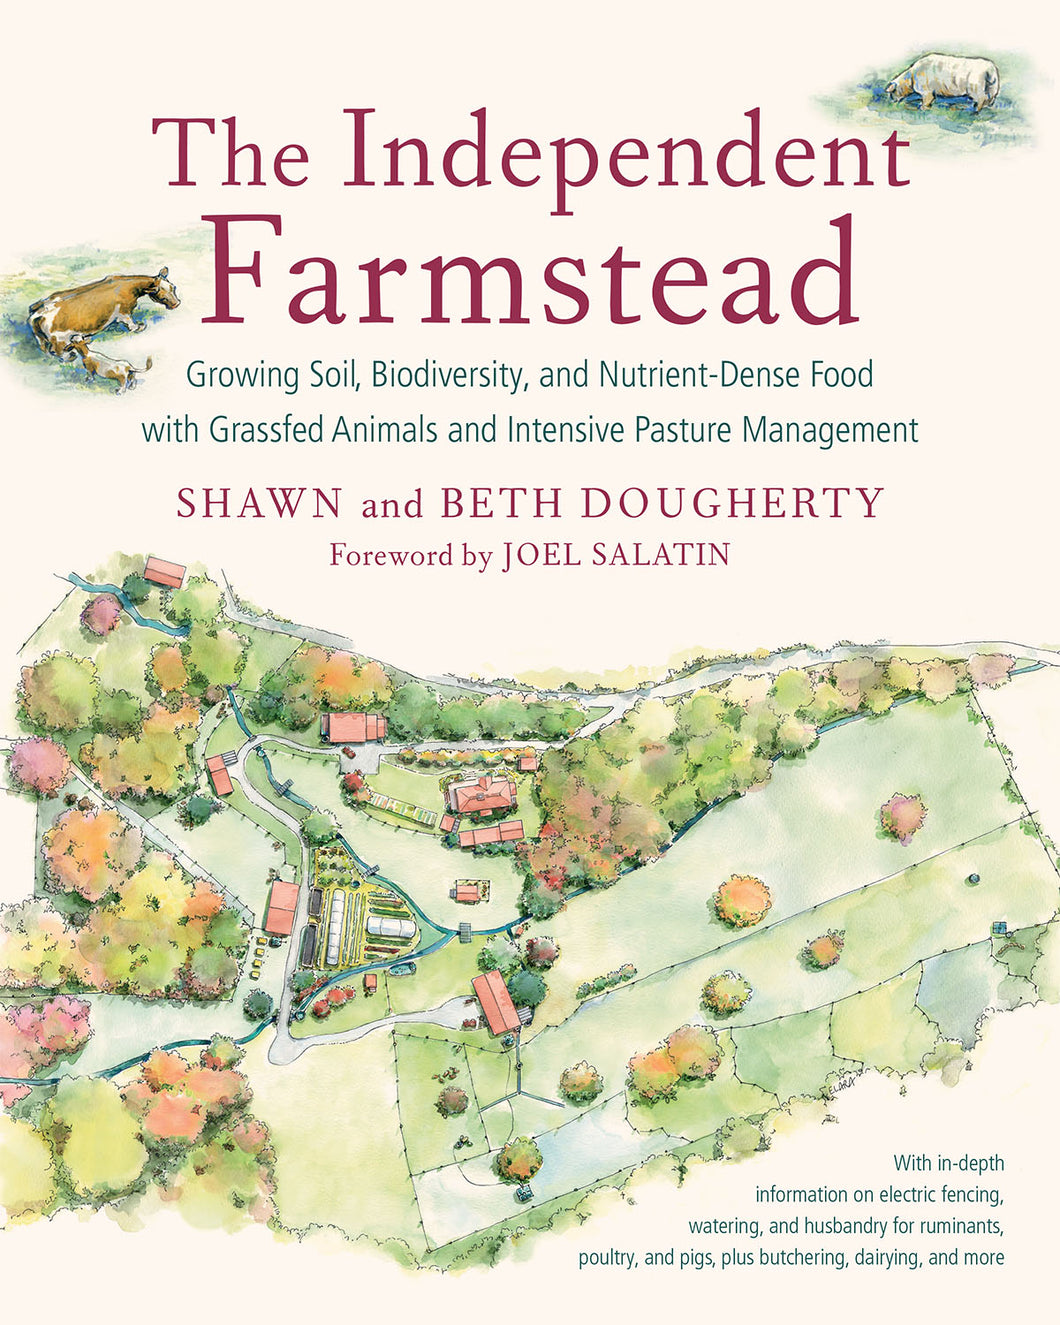 The Independent Farmstead by Shawn and Beth Dougherty